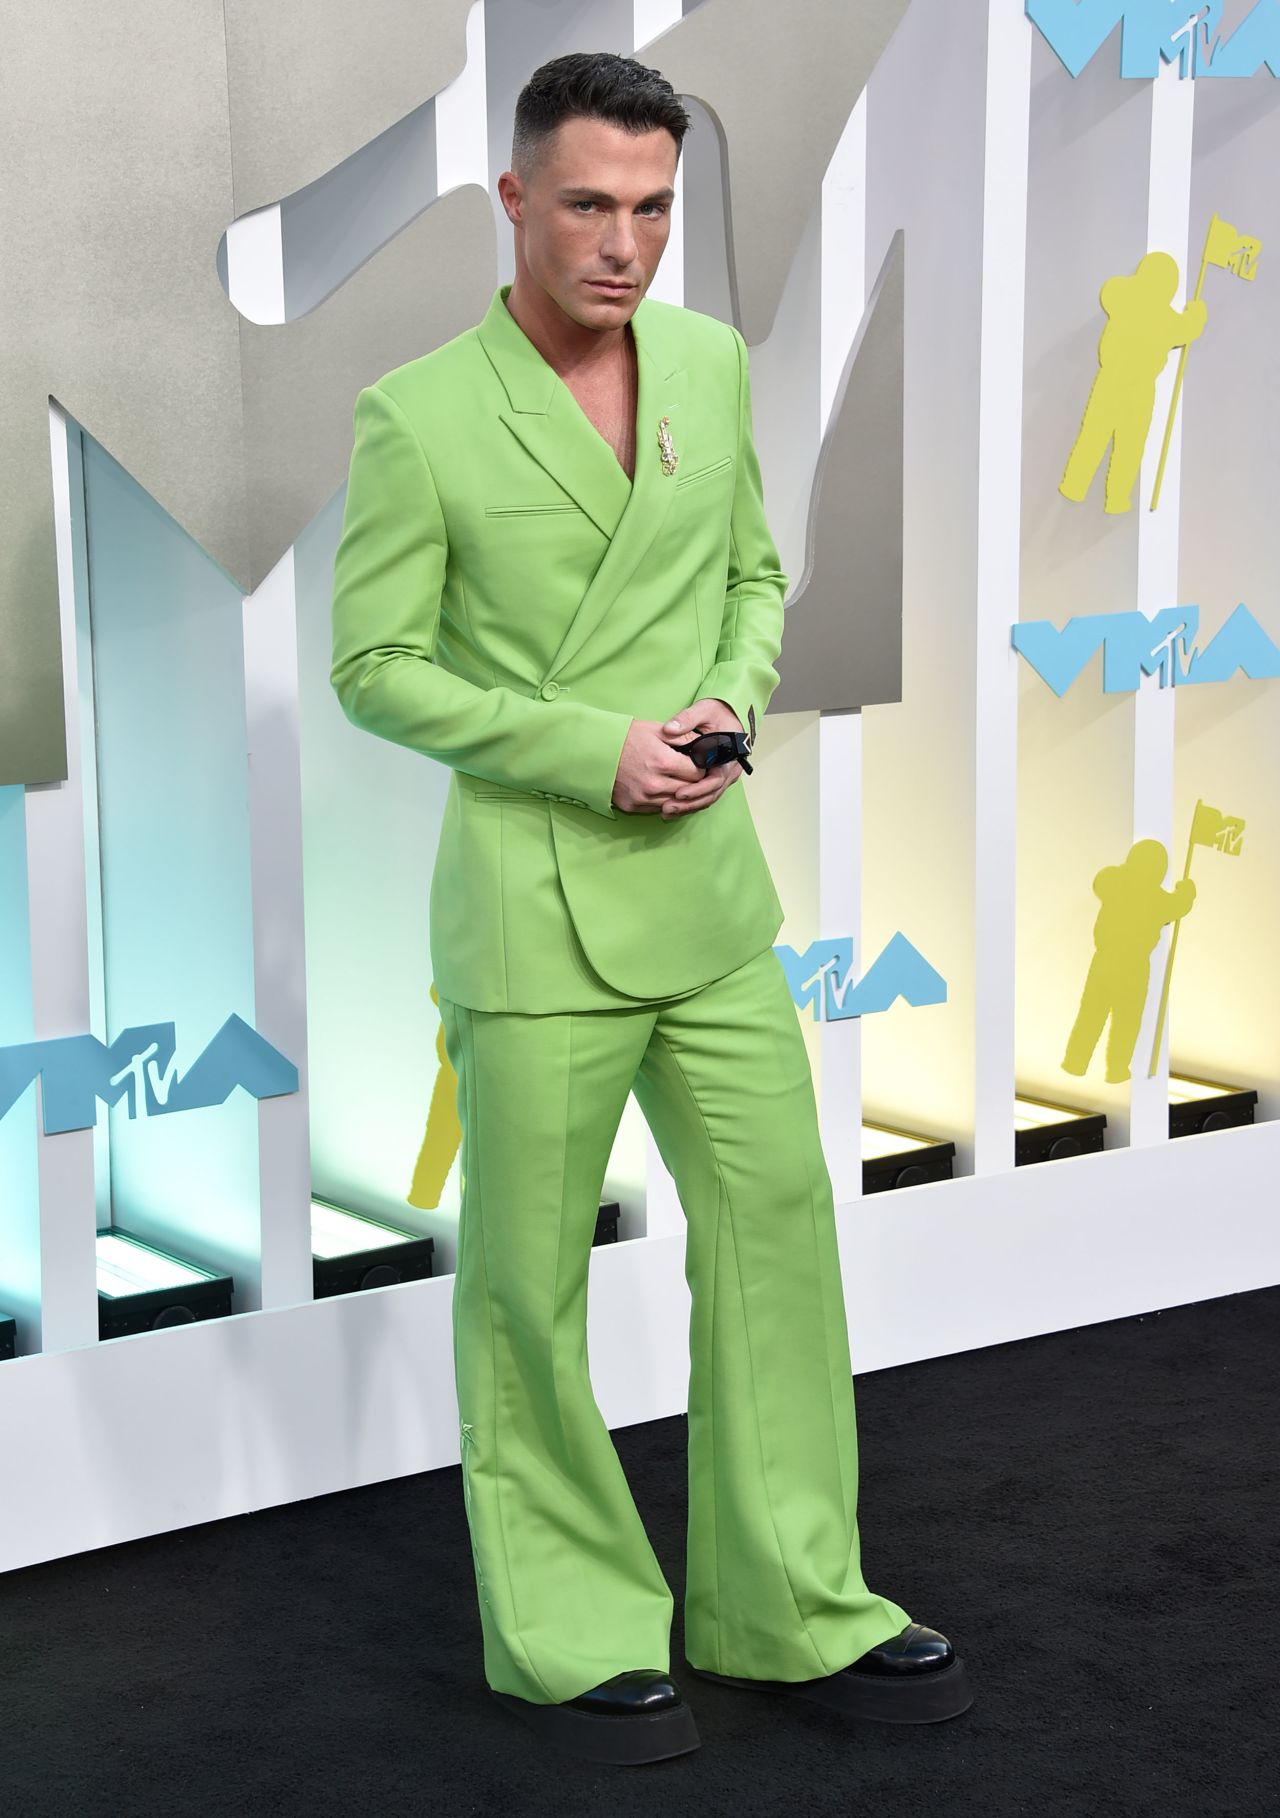 Actor Colton Haynes was impossible to miss in an acid green flared suit by Dior, featuring a wrapped blazer, diamond brooch and platform shoes.